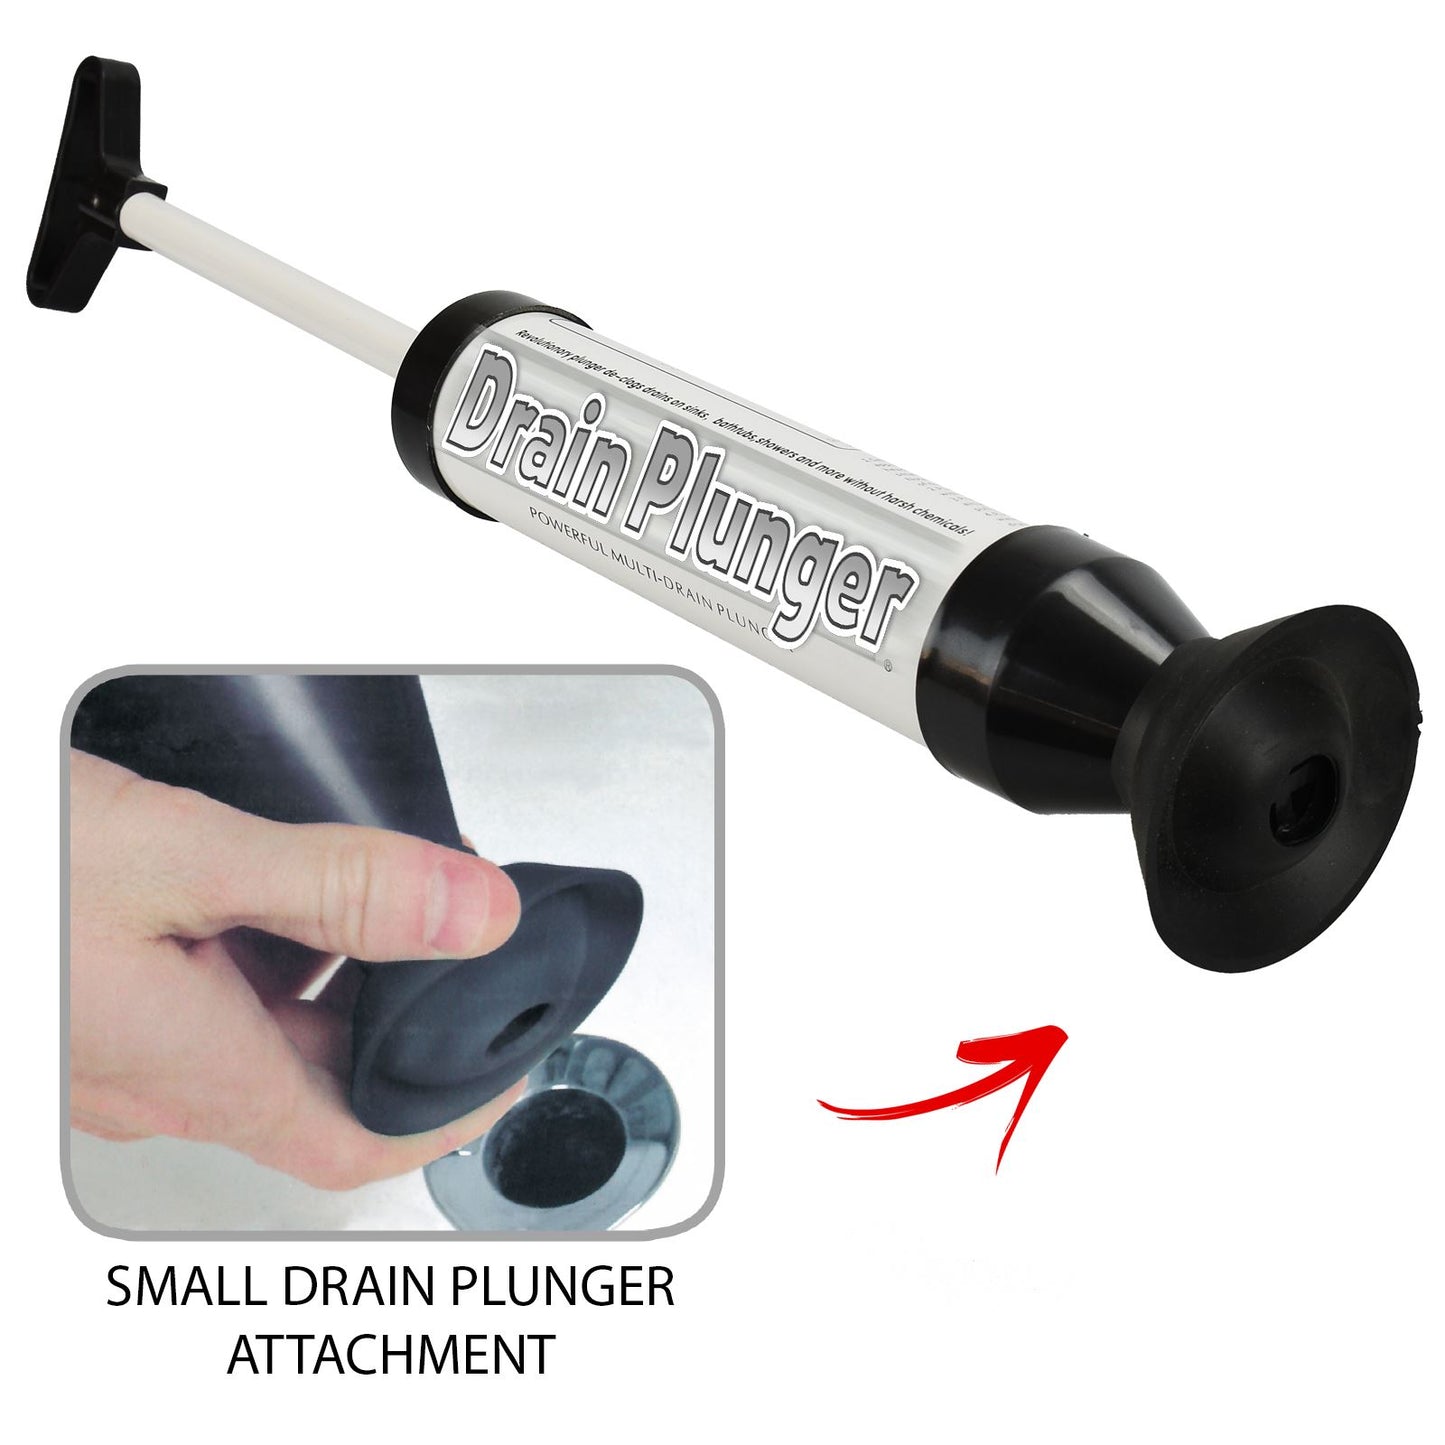 Unblock Your Toilet With This Powerful Drain Plunger